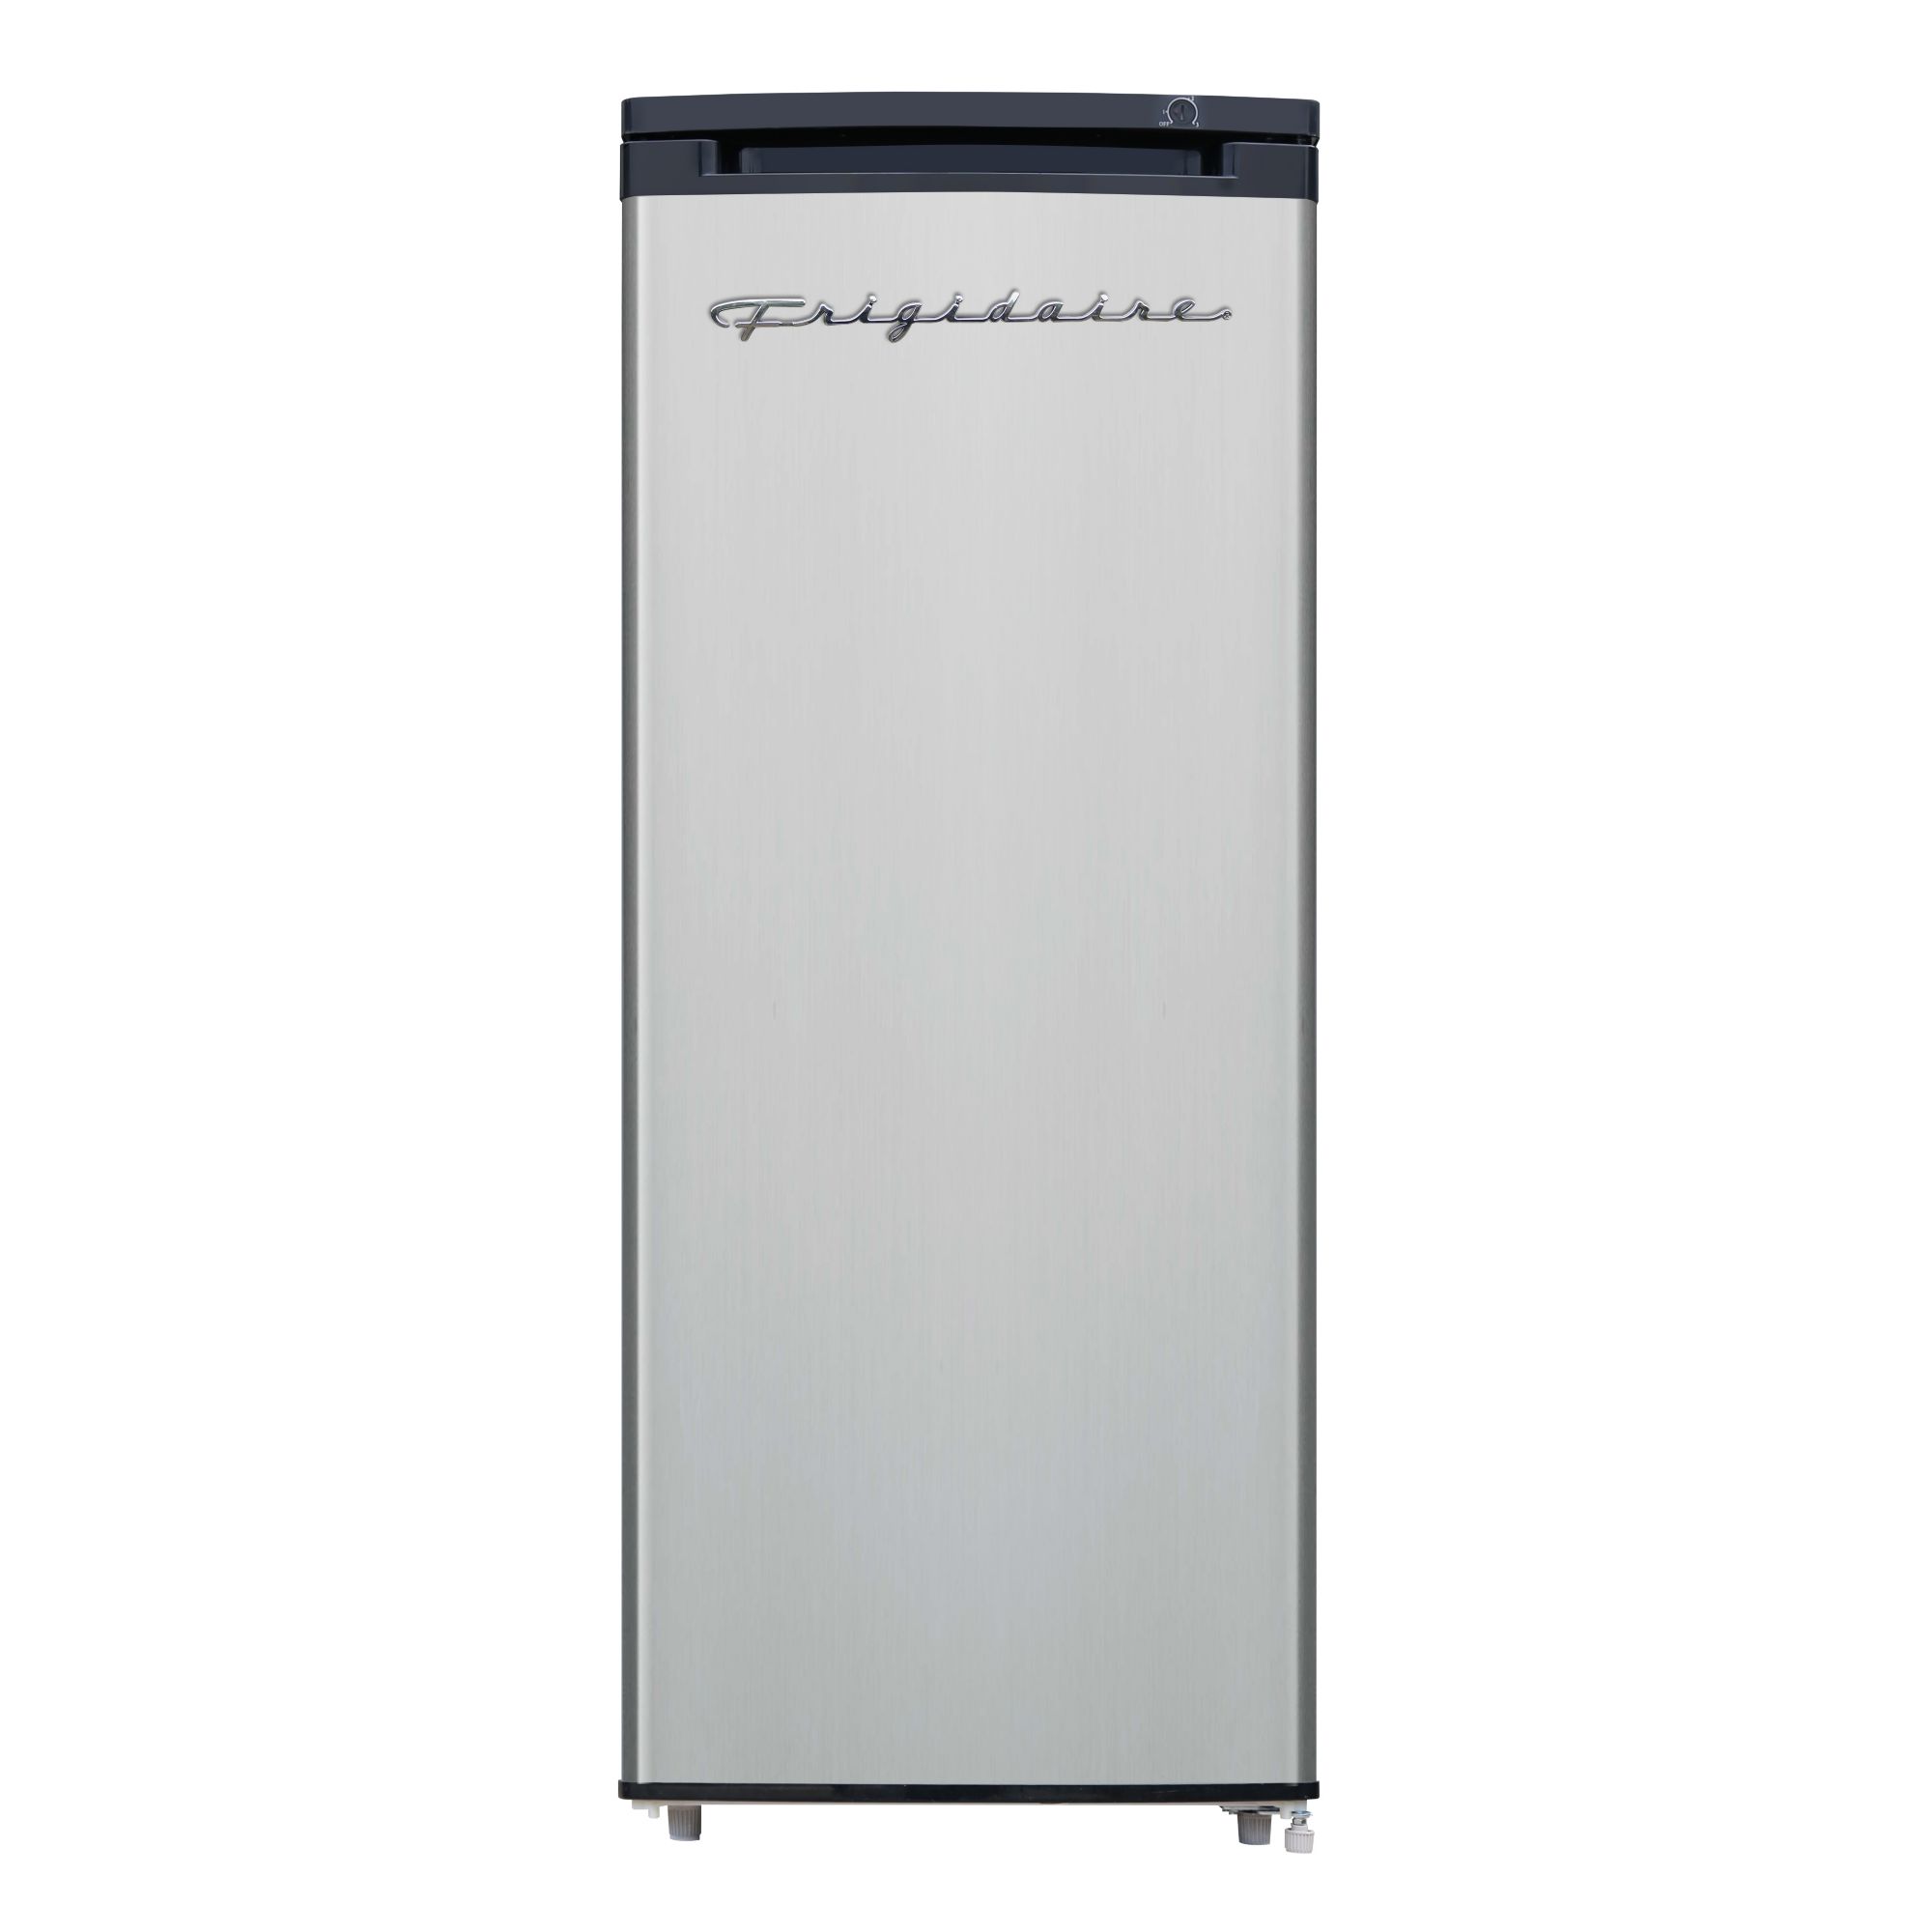 CUF-301SS | Whynter CUF-301SS 3.0 cu. ft. Energy Star Upright Freezer with  Lock – Stainless Steel